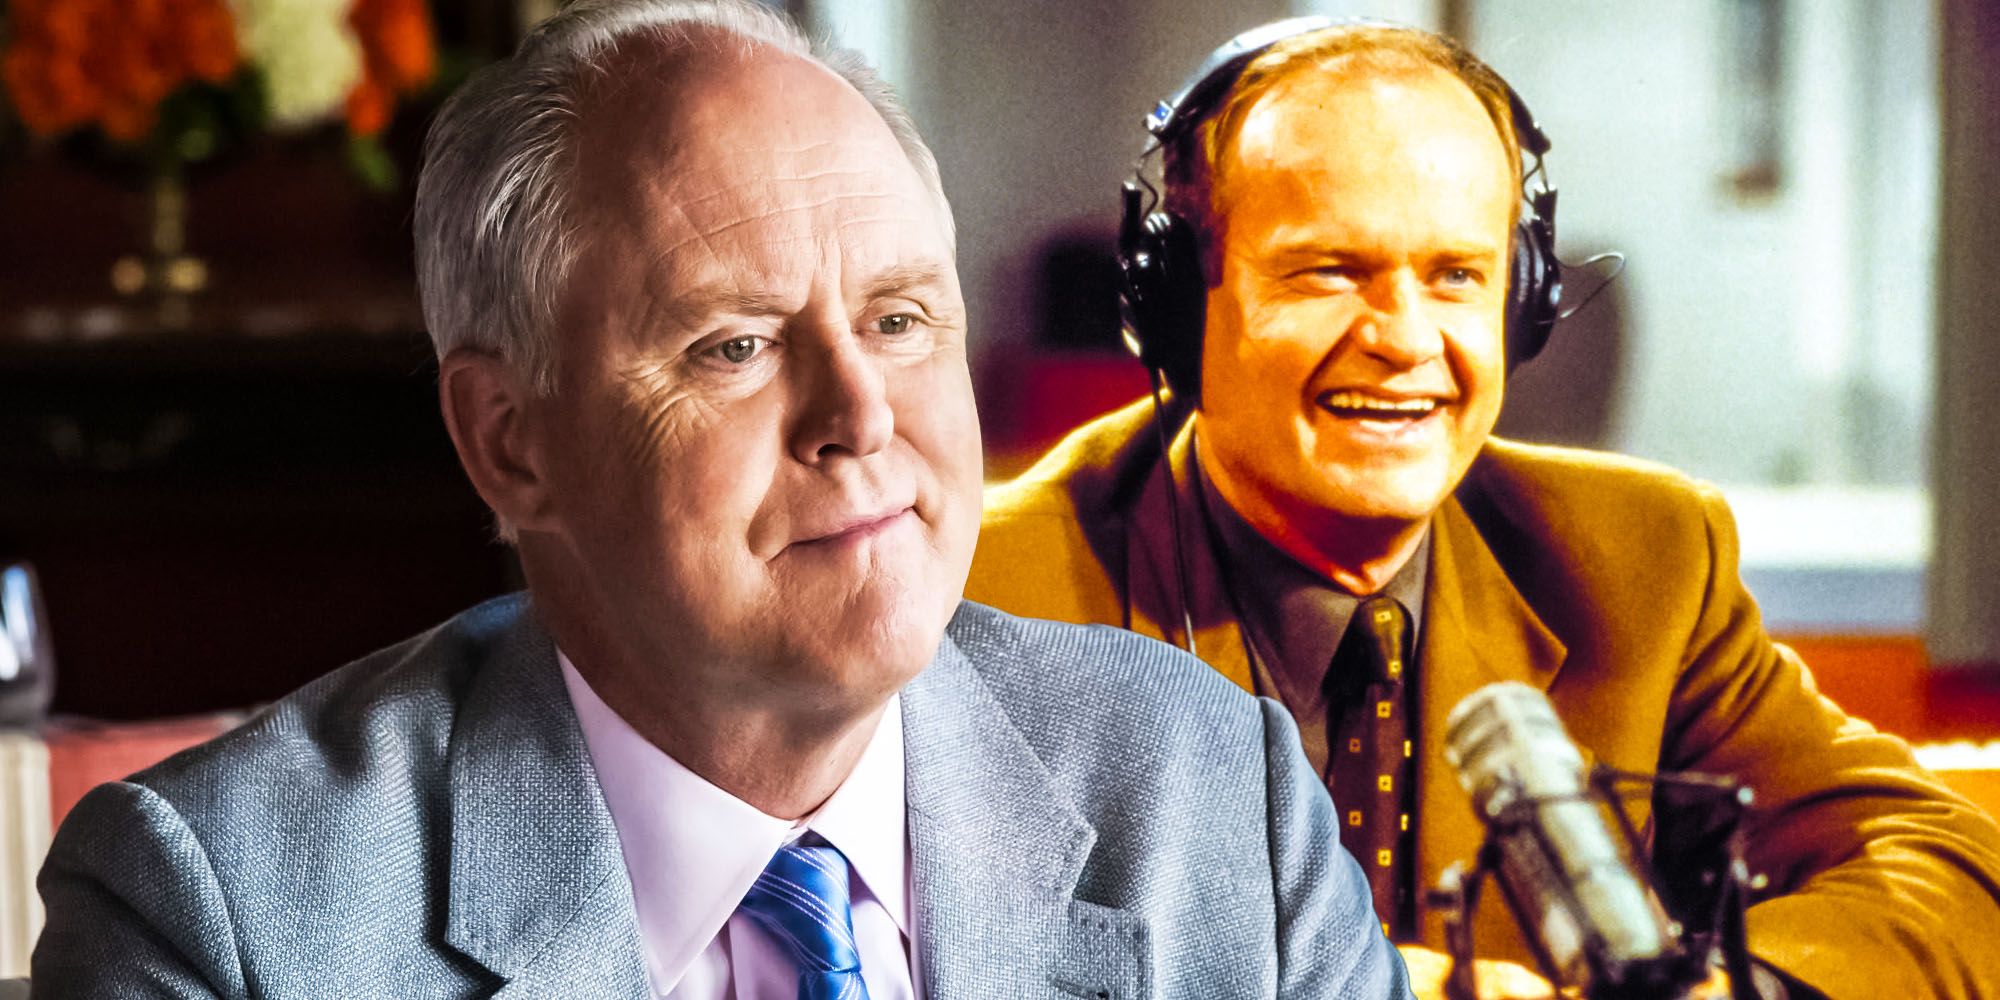 Why John Lithgow turned down the role of frasier